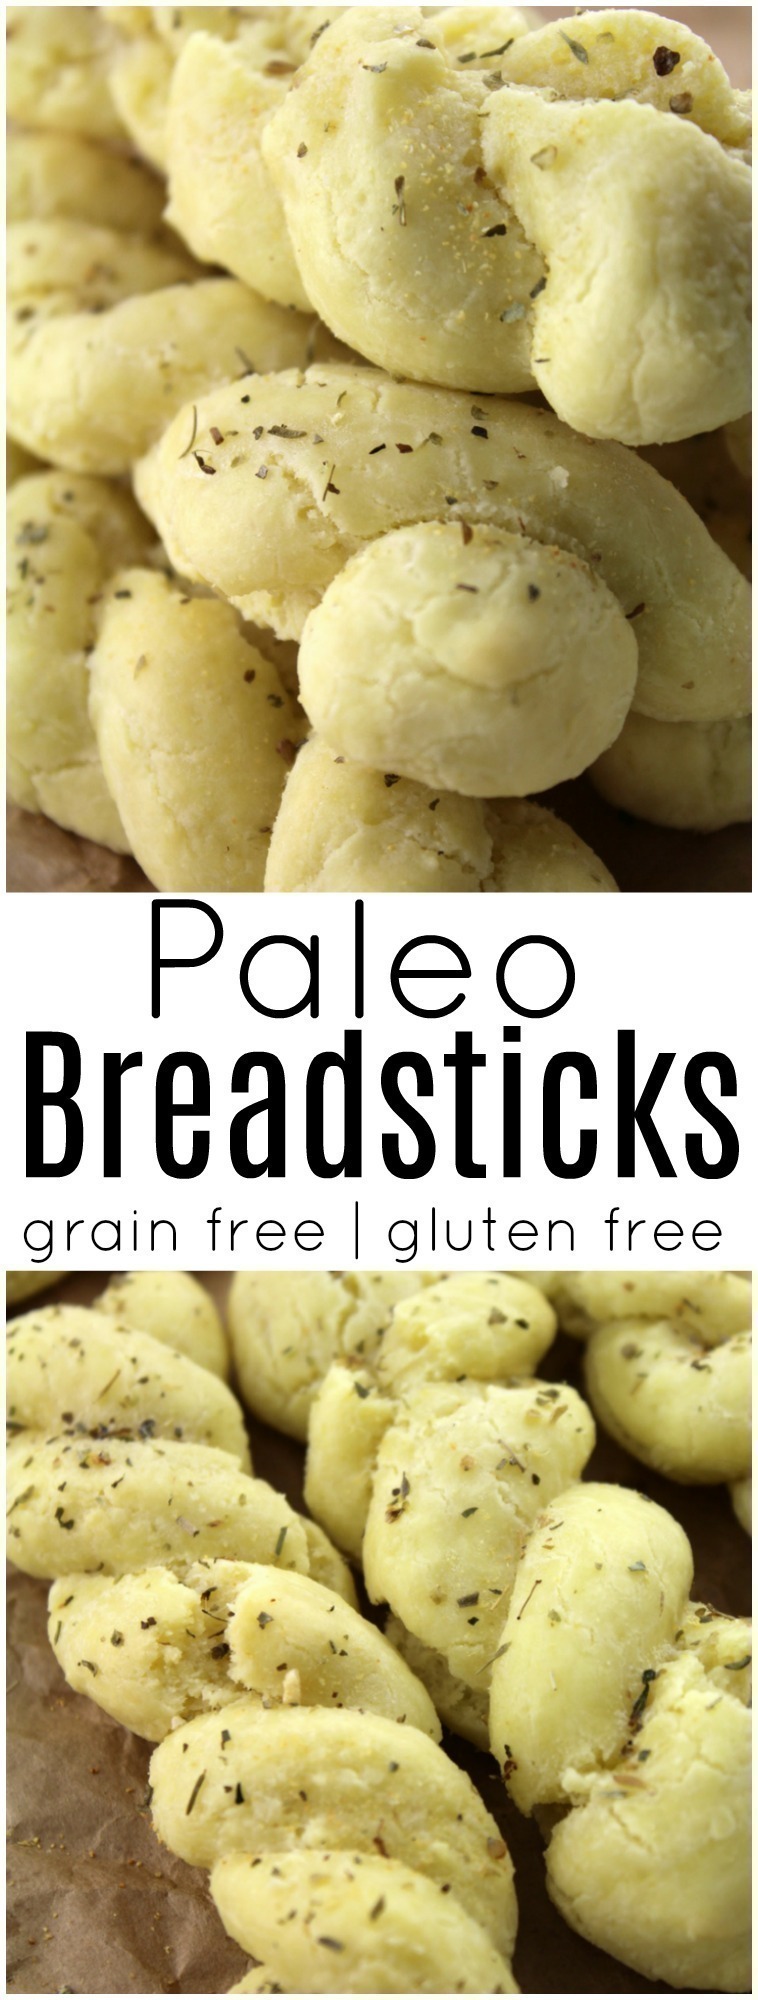 Combine almond flour, tapioca flour, eggs and coconut oil to make a grain-free, gluten-free Paleo garlic and herb breadsticks that will satisfy your next urge for carbs.